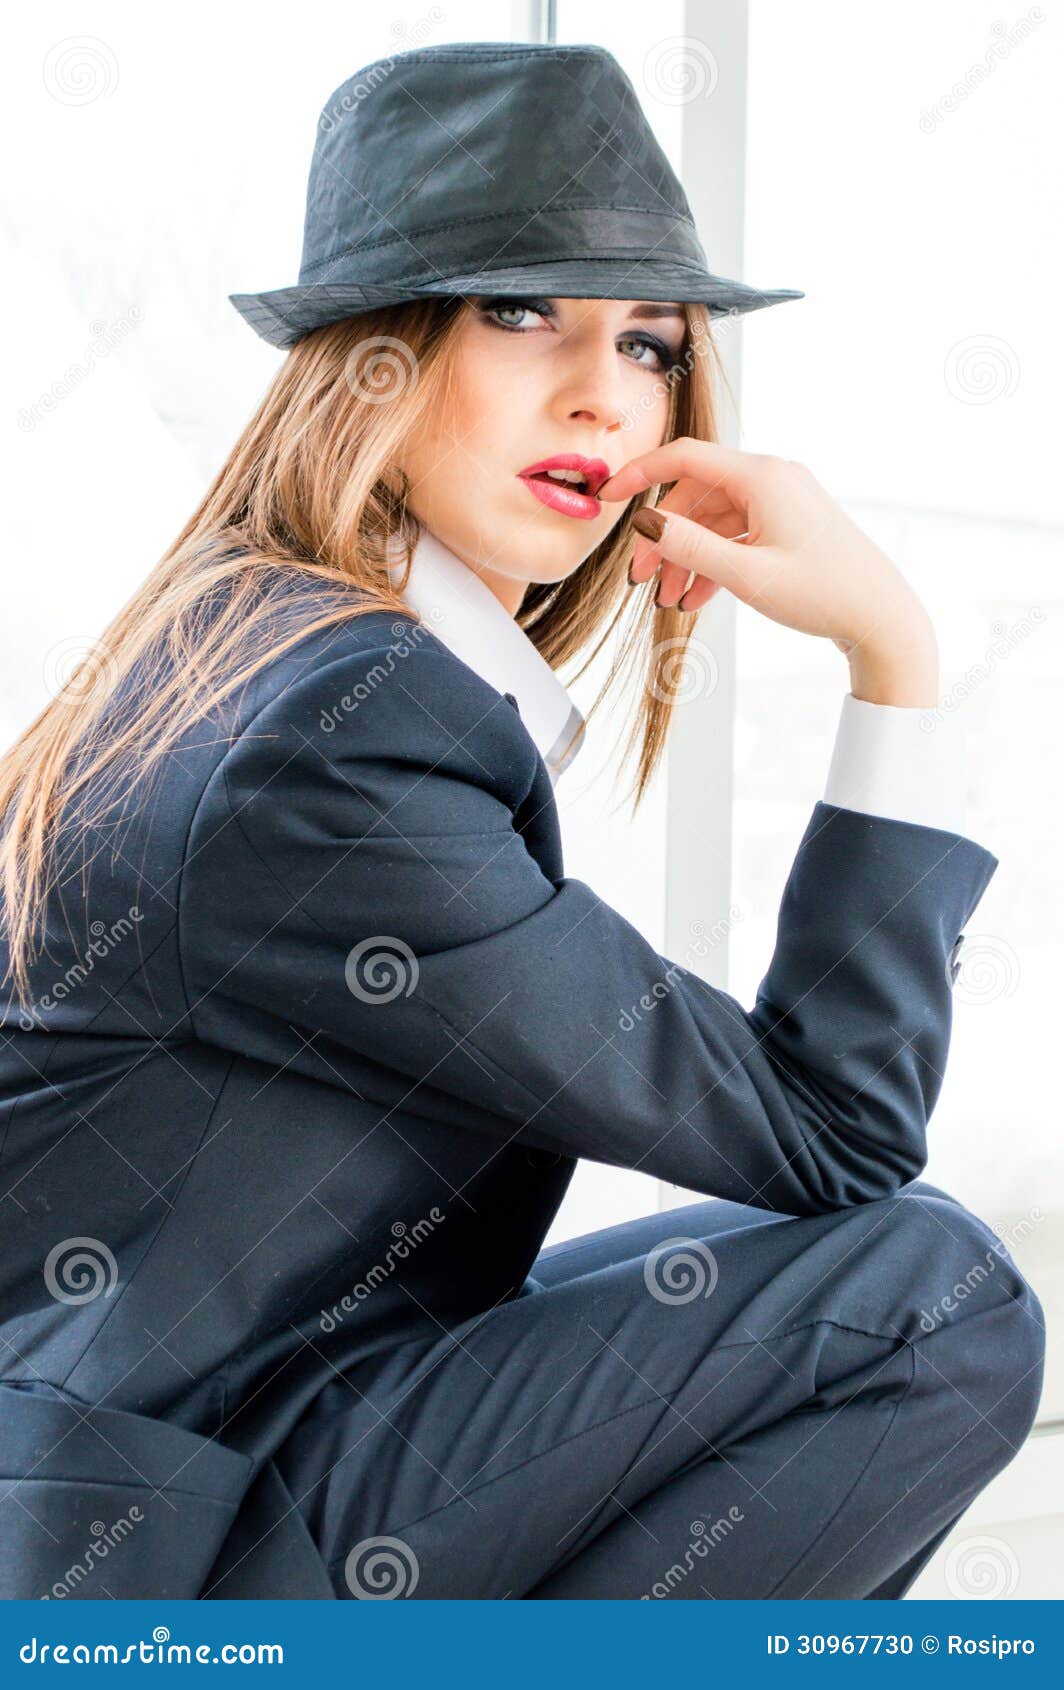 Young Business Woman Wearing Man's Suit, Hat In Office Stock Photo